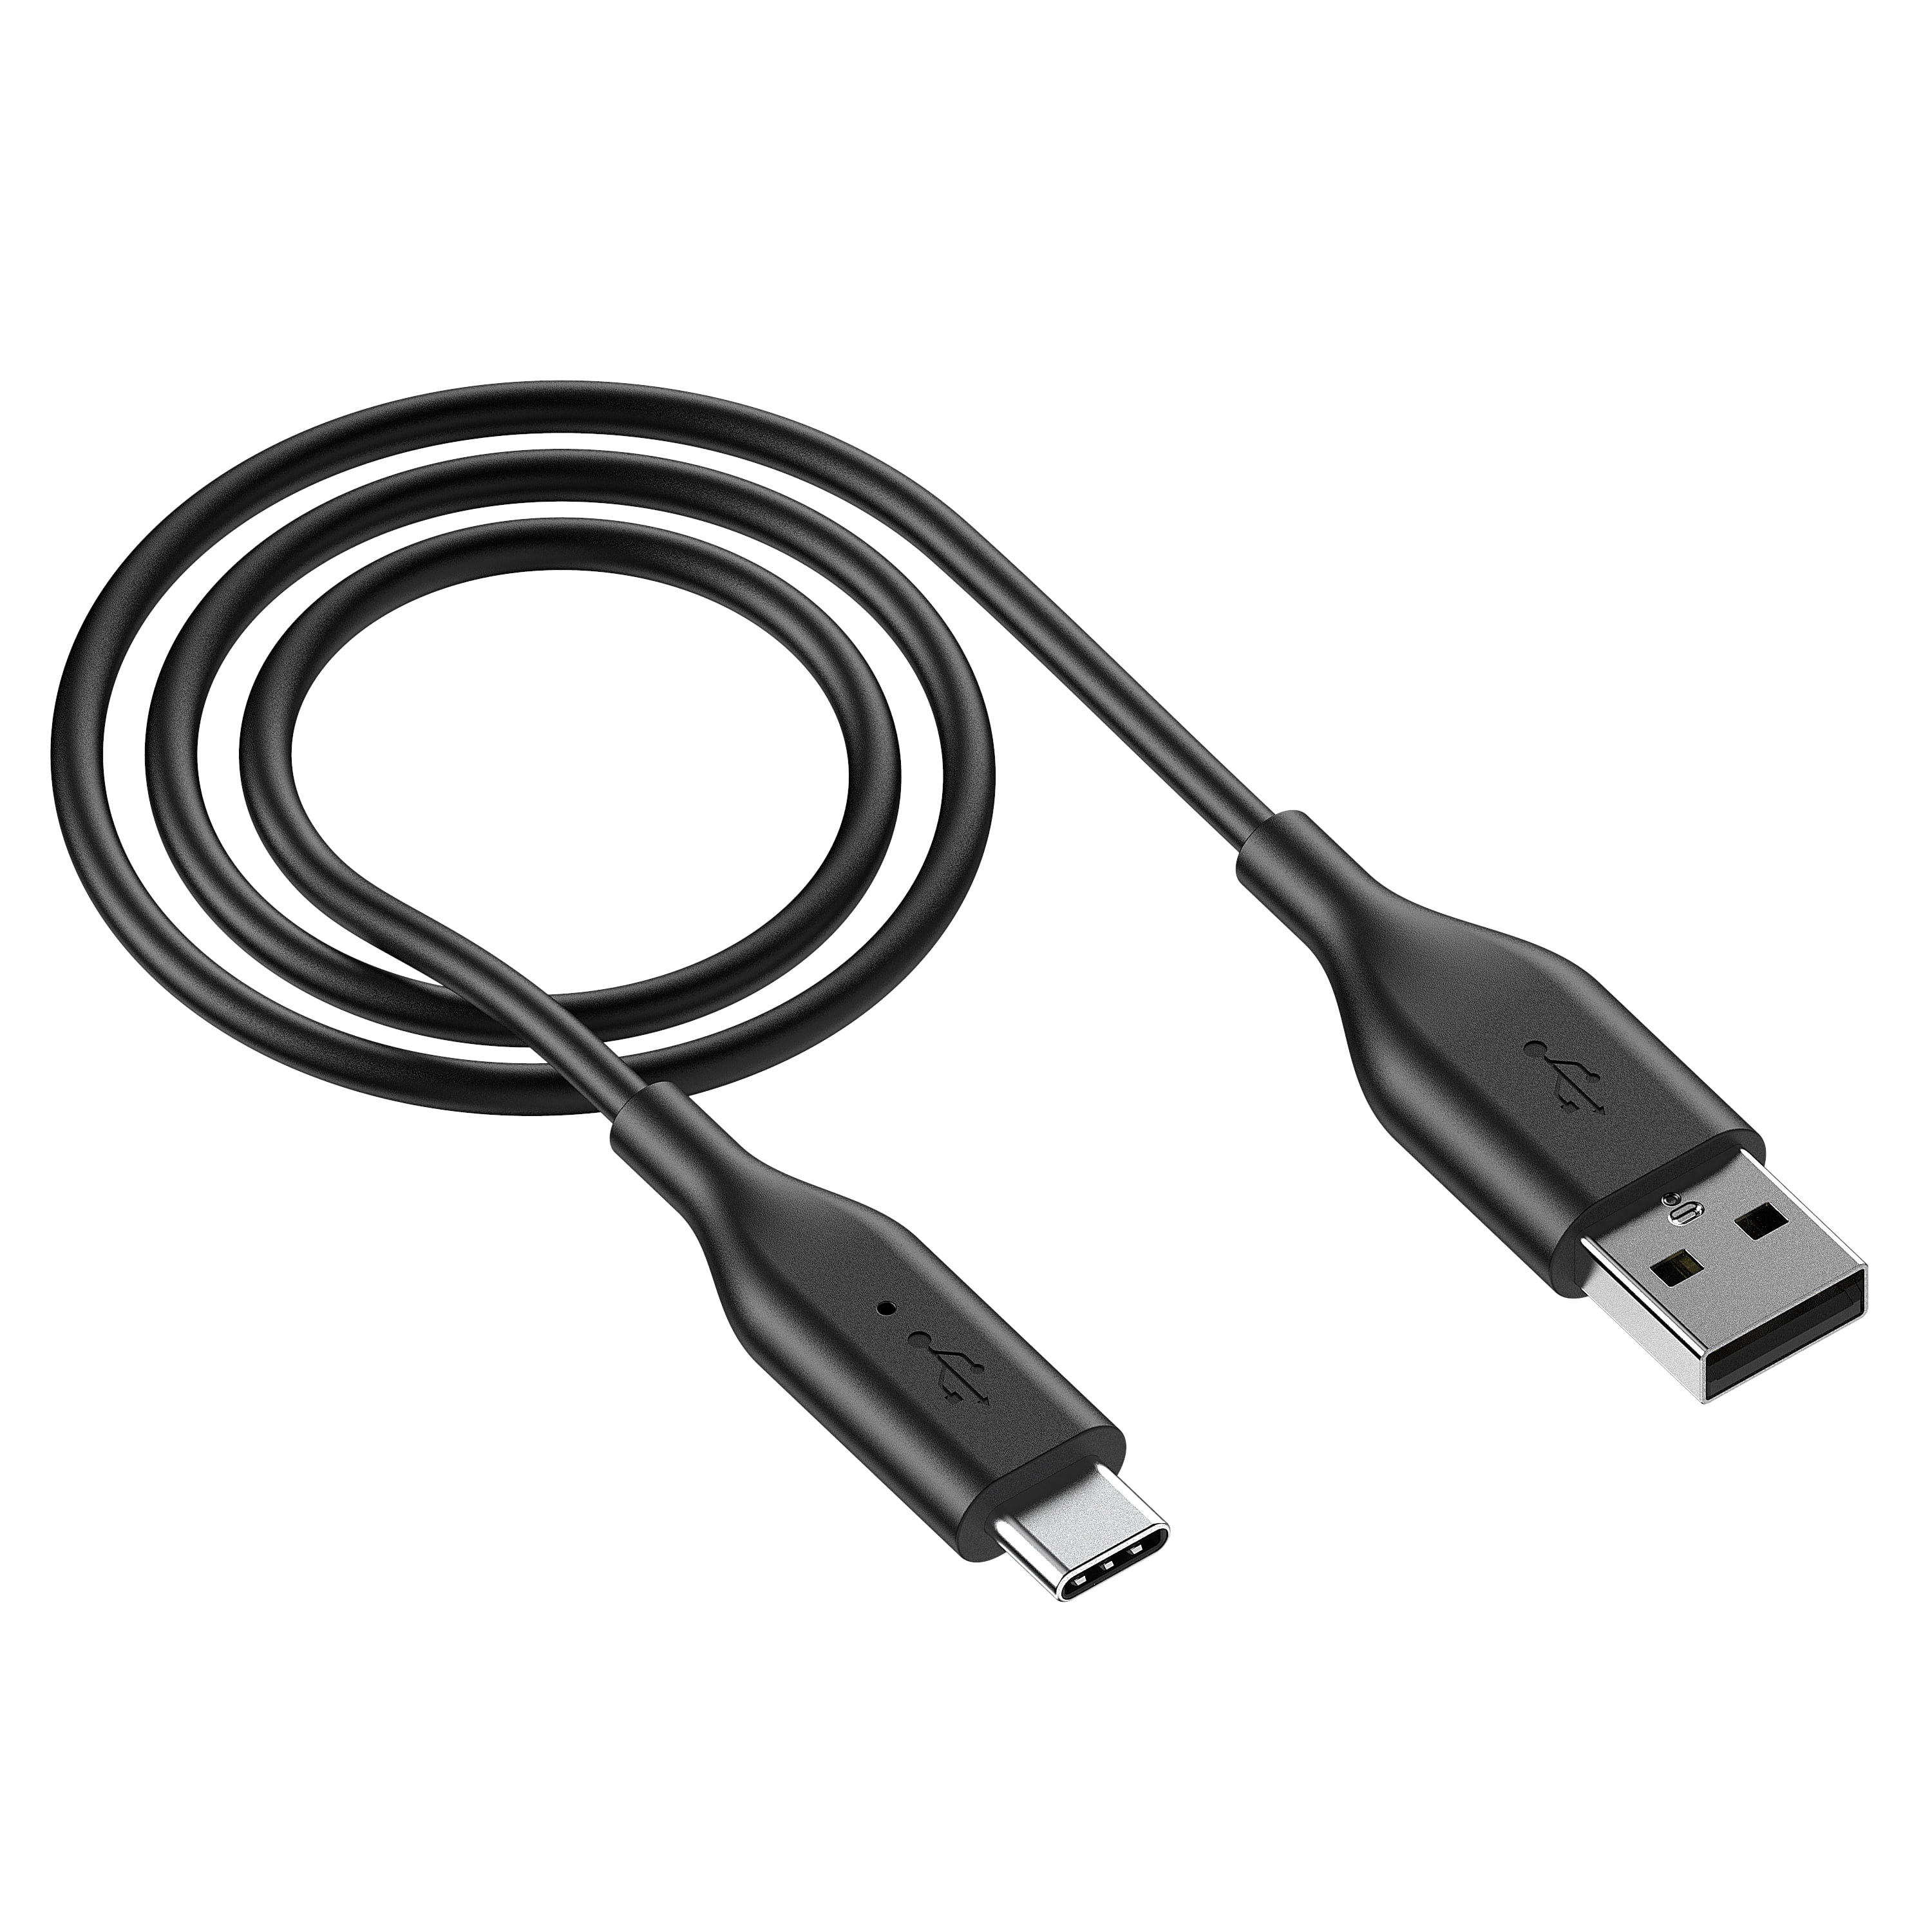 Auto Drive USB Type-a to USB Type-C PVC Data Sync and Charging Cable 3 feet for USB Type-C Devices